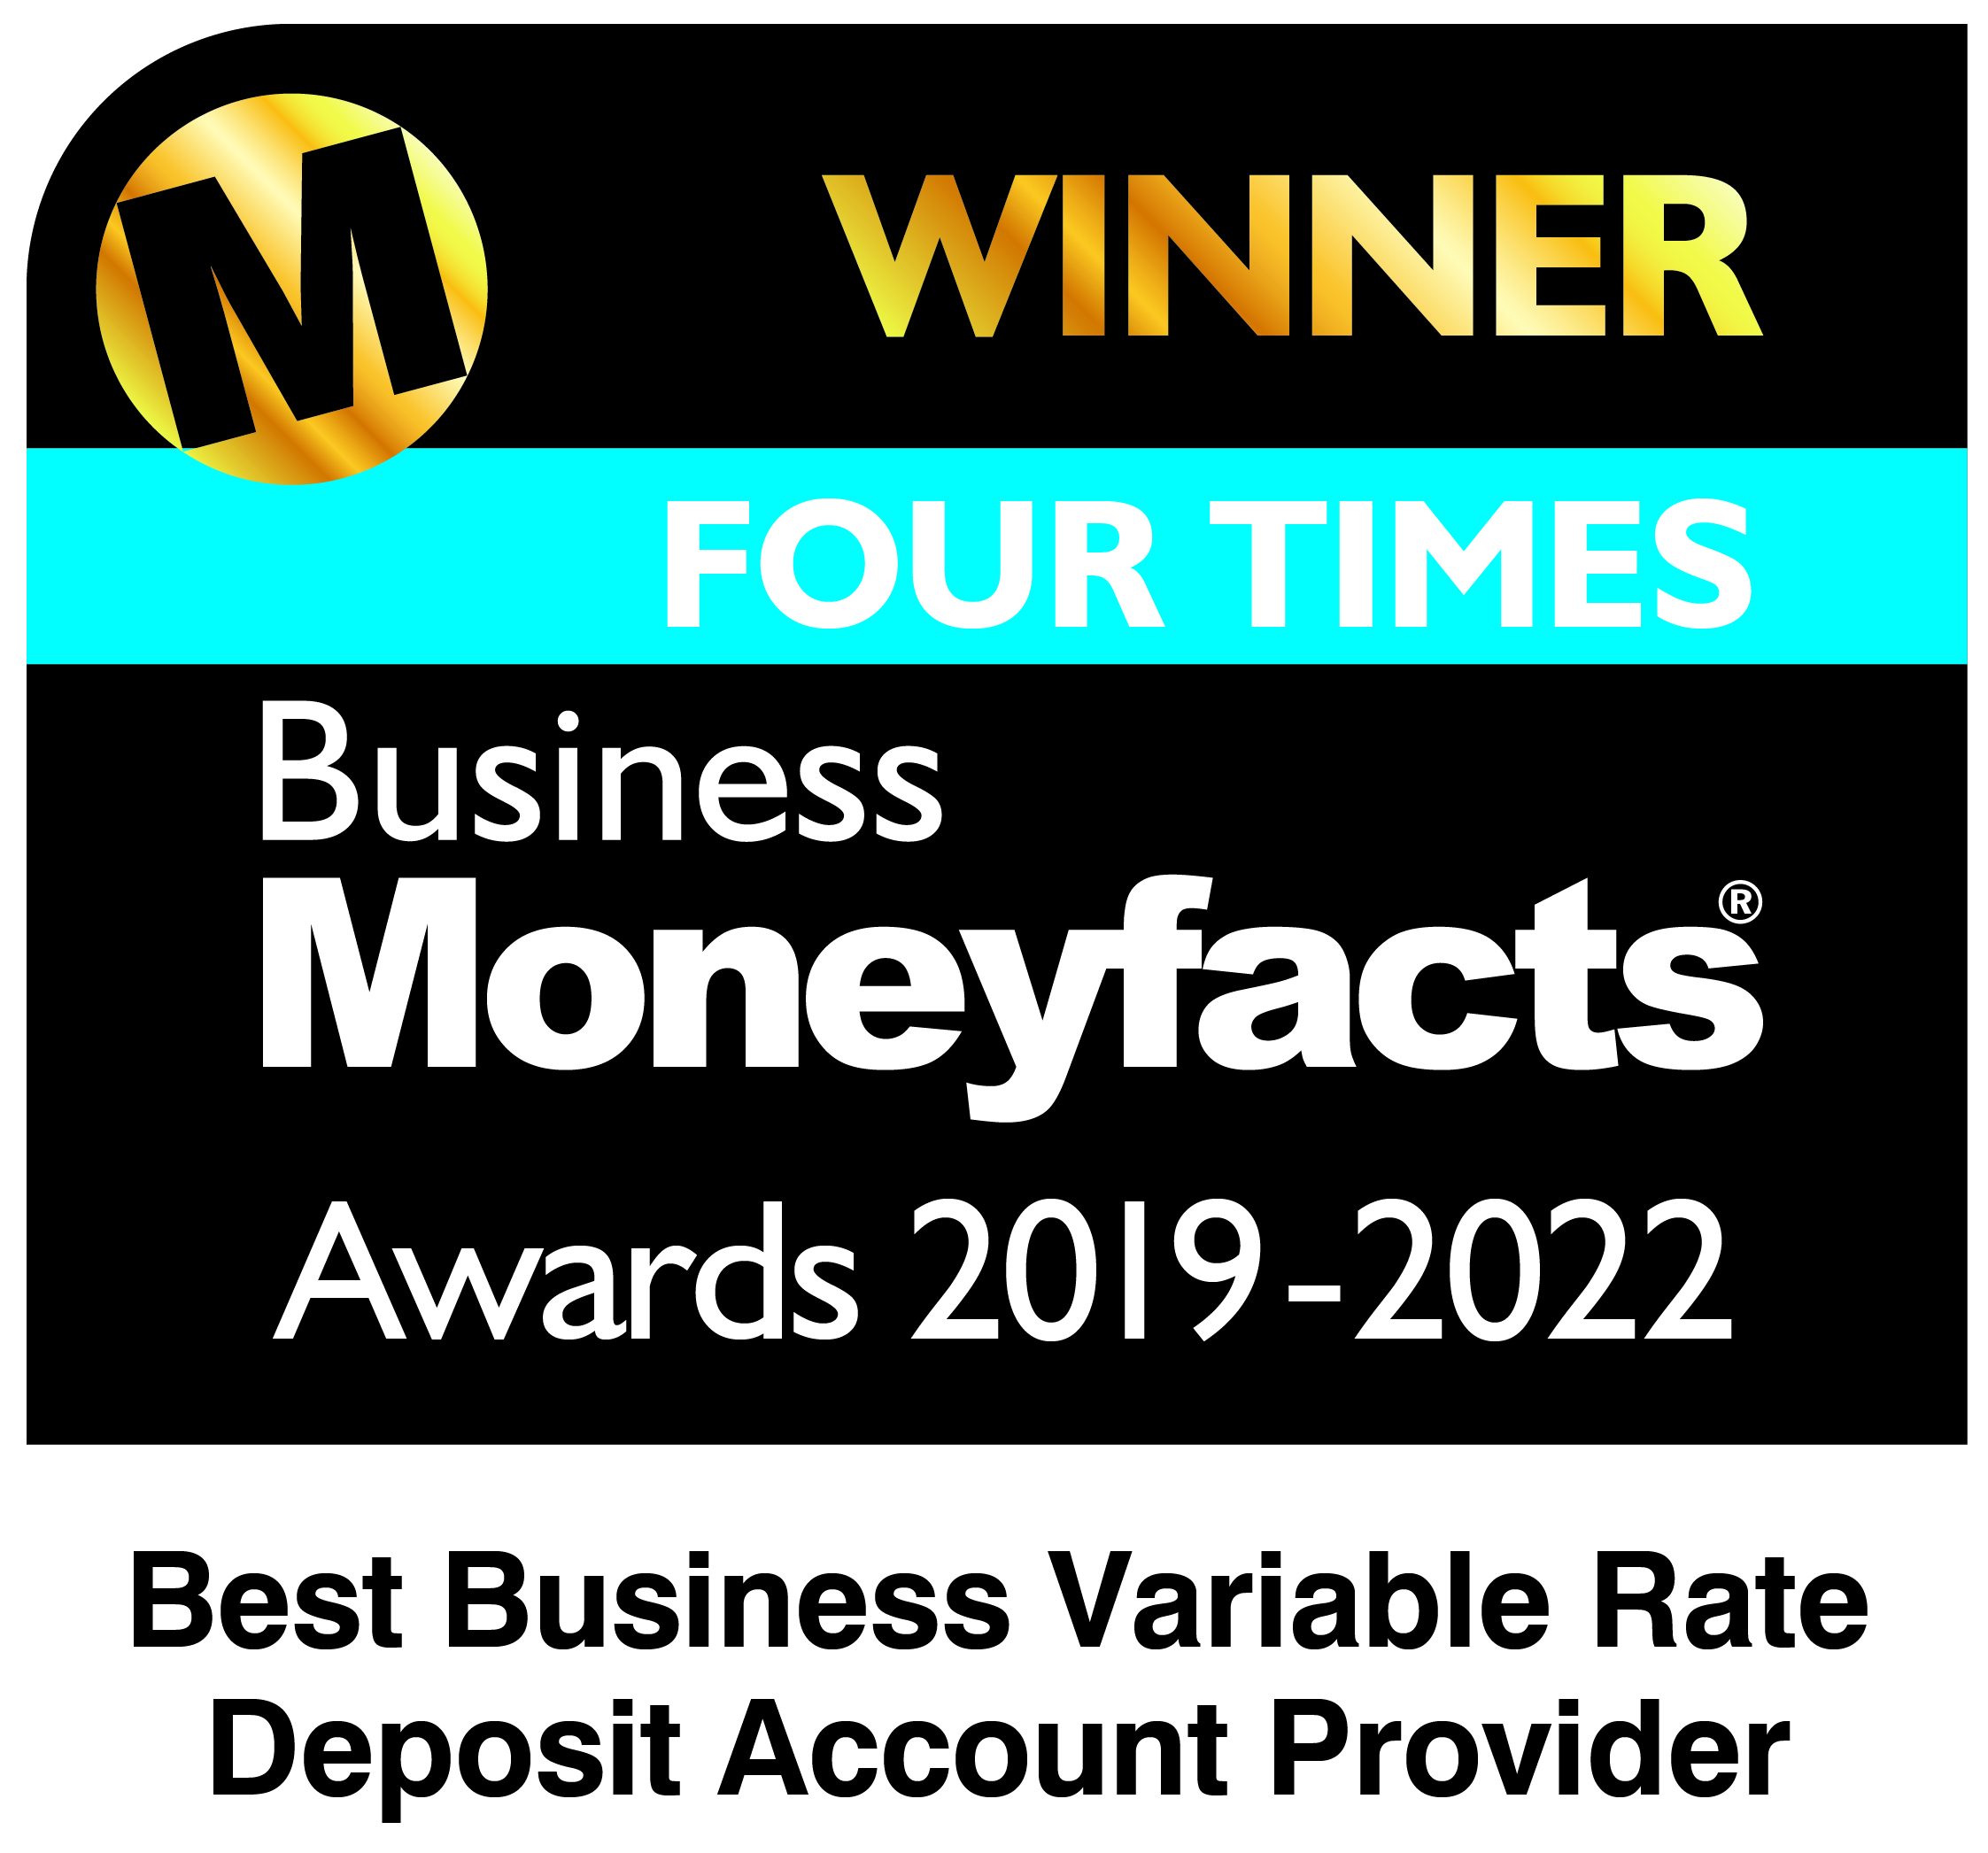 Best Business Variable Rate Deposit Account Provider 2022